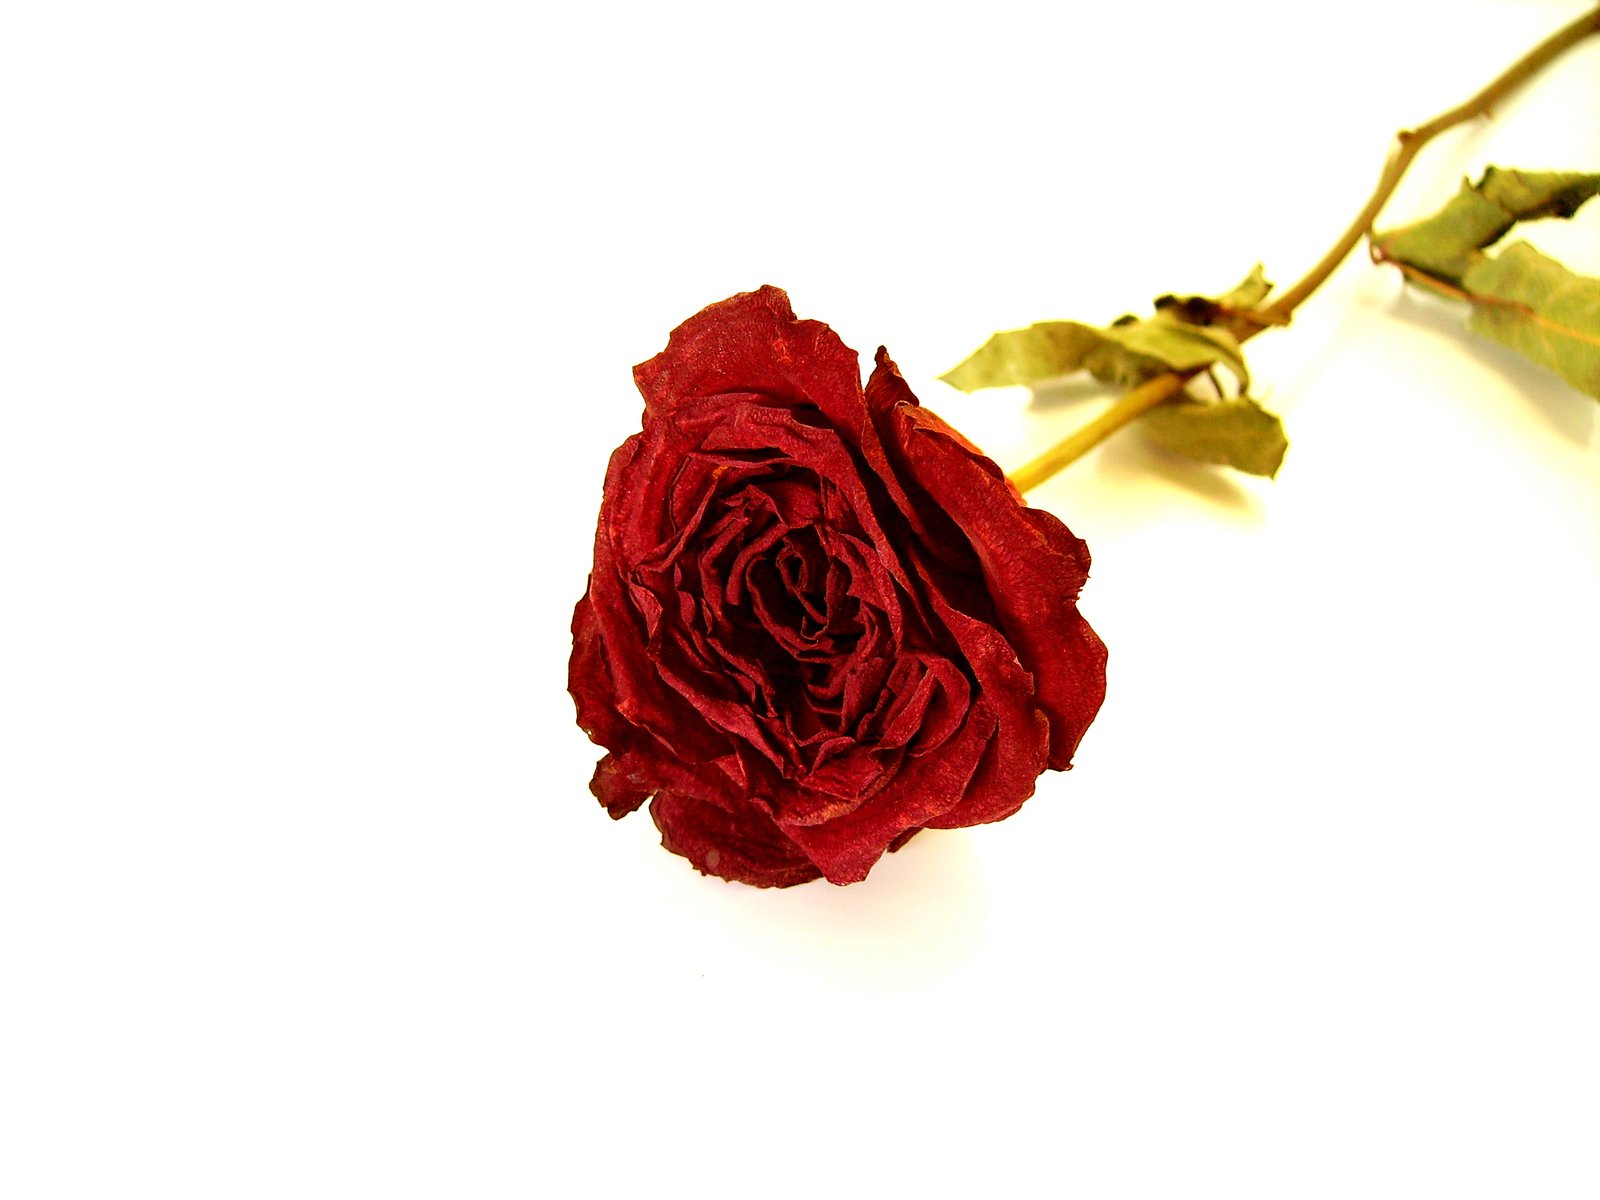 a single red rose with long stems on a white surface